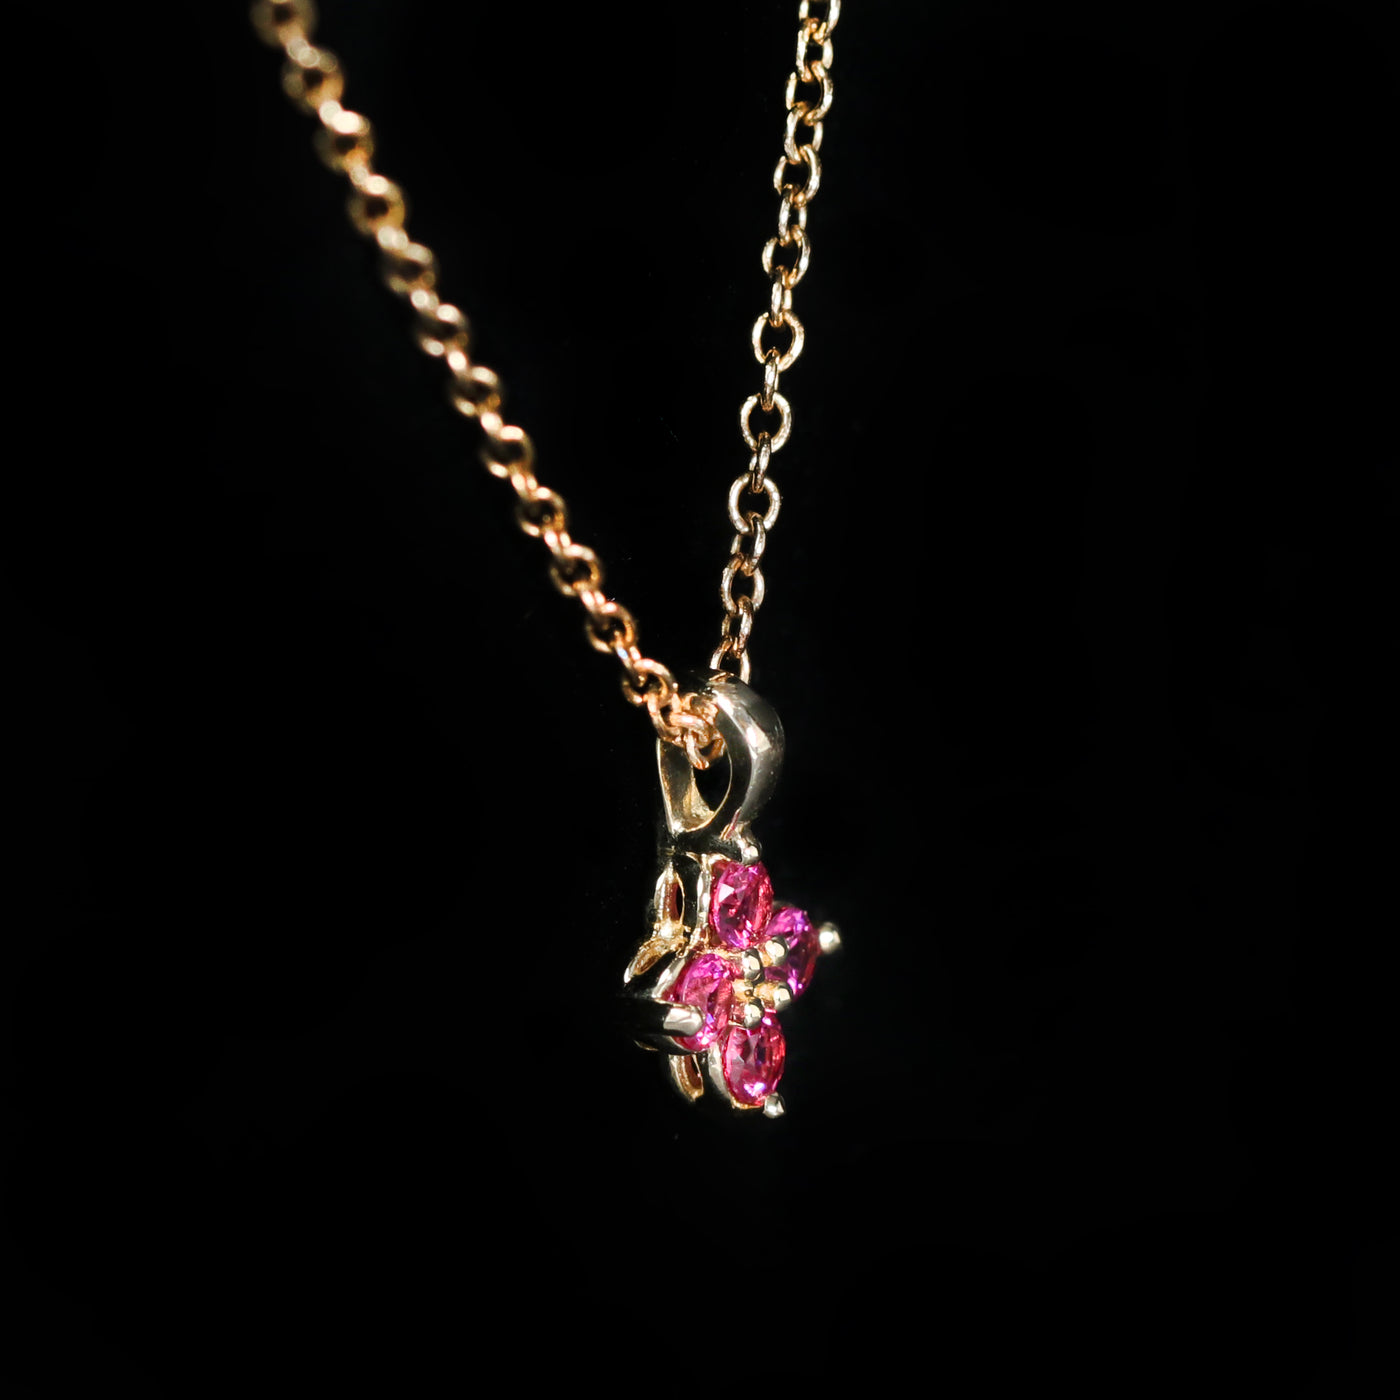 14K Yellow Gold 0.11 CTW Pink Spinel Pendant